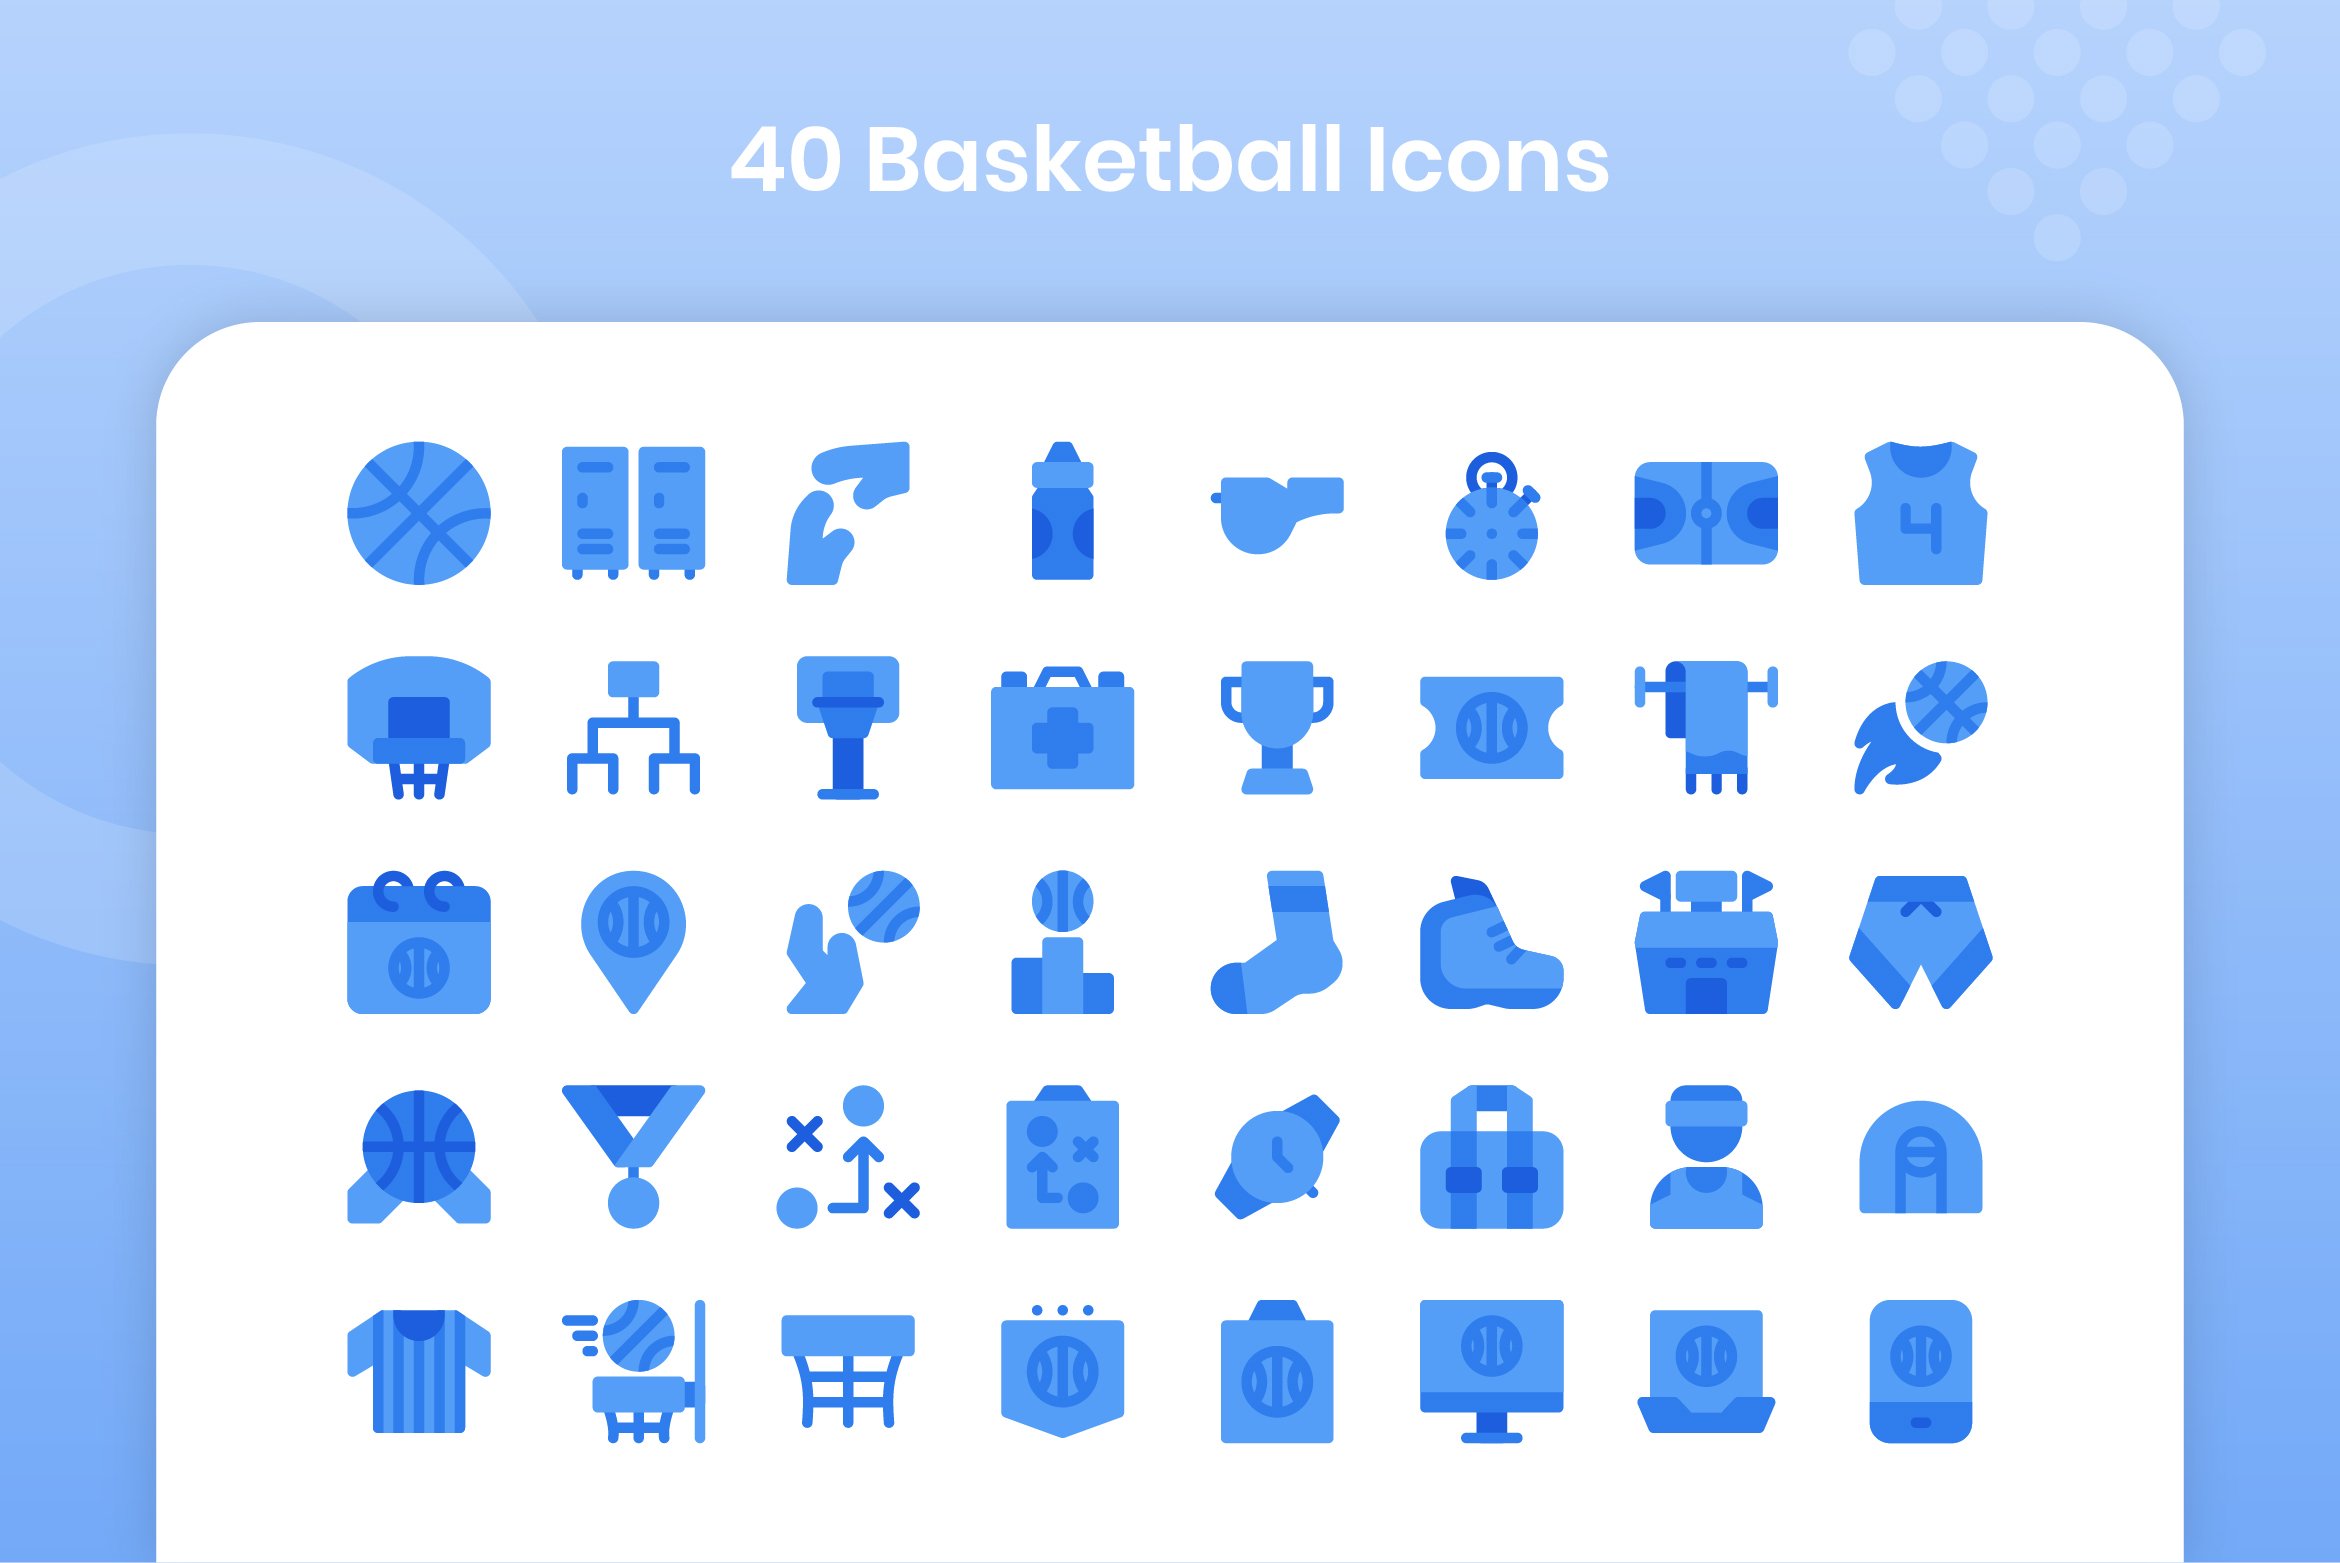 40 Basketball - Flat preview image.